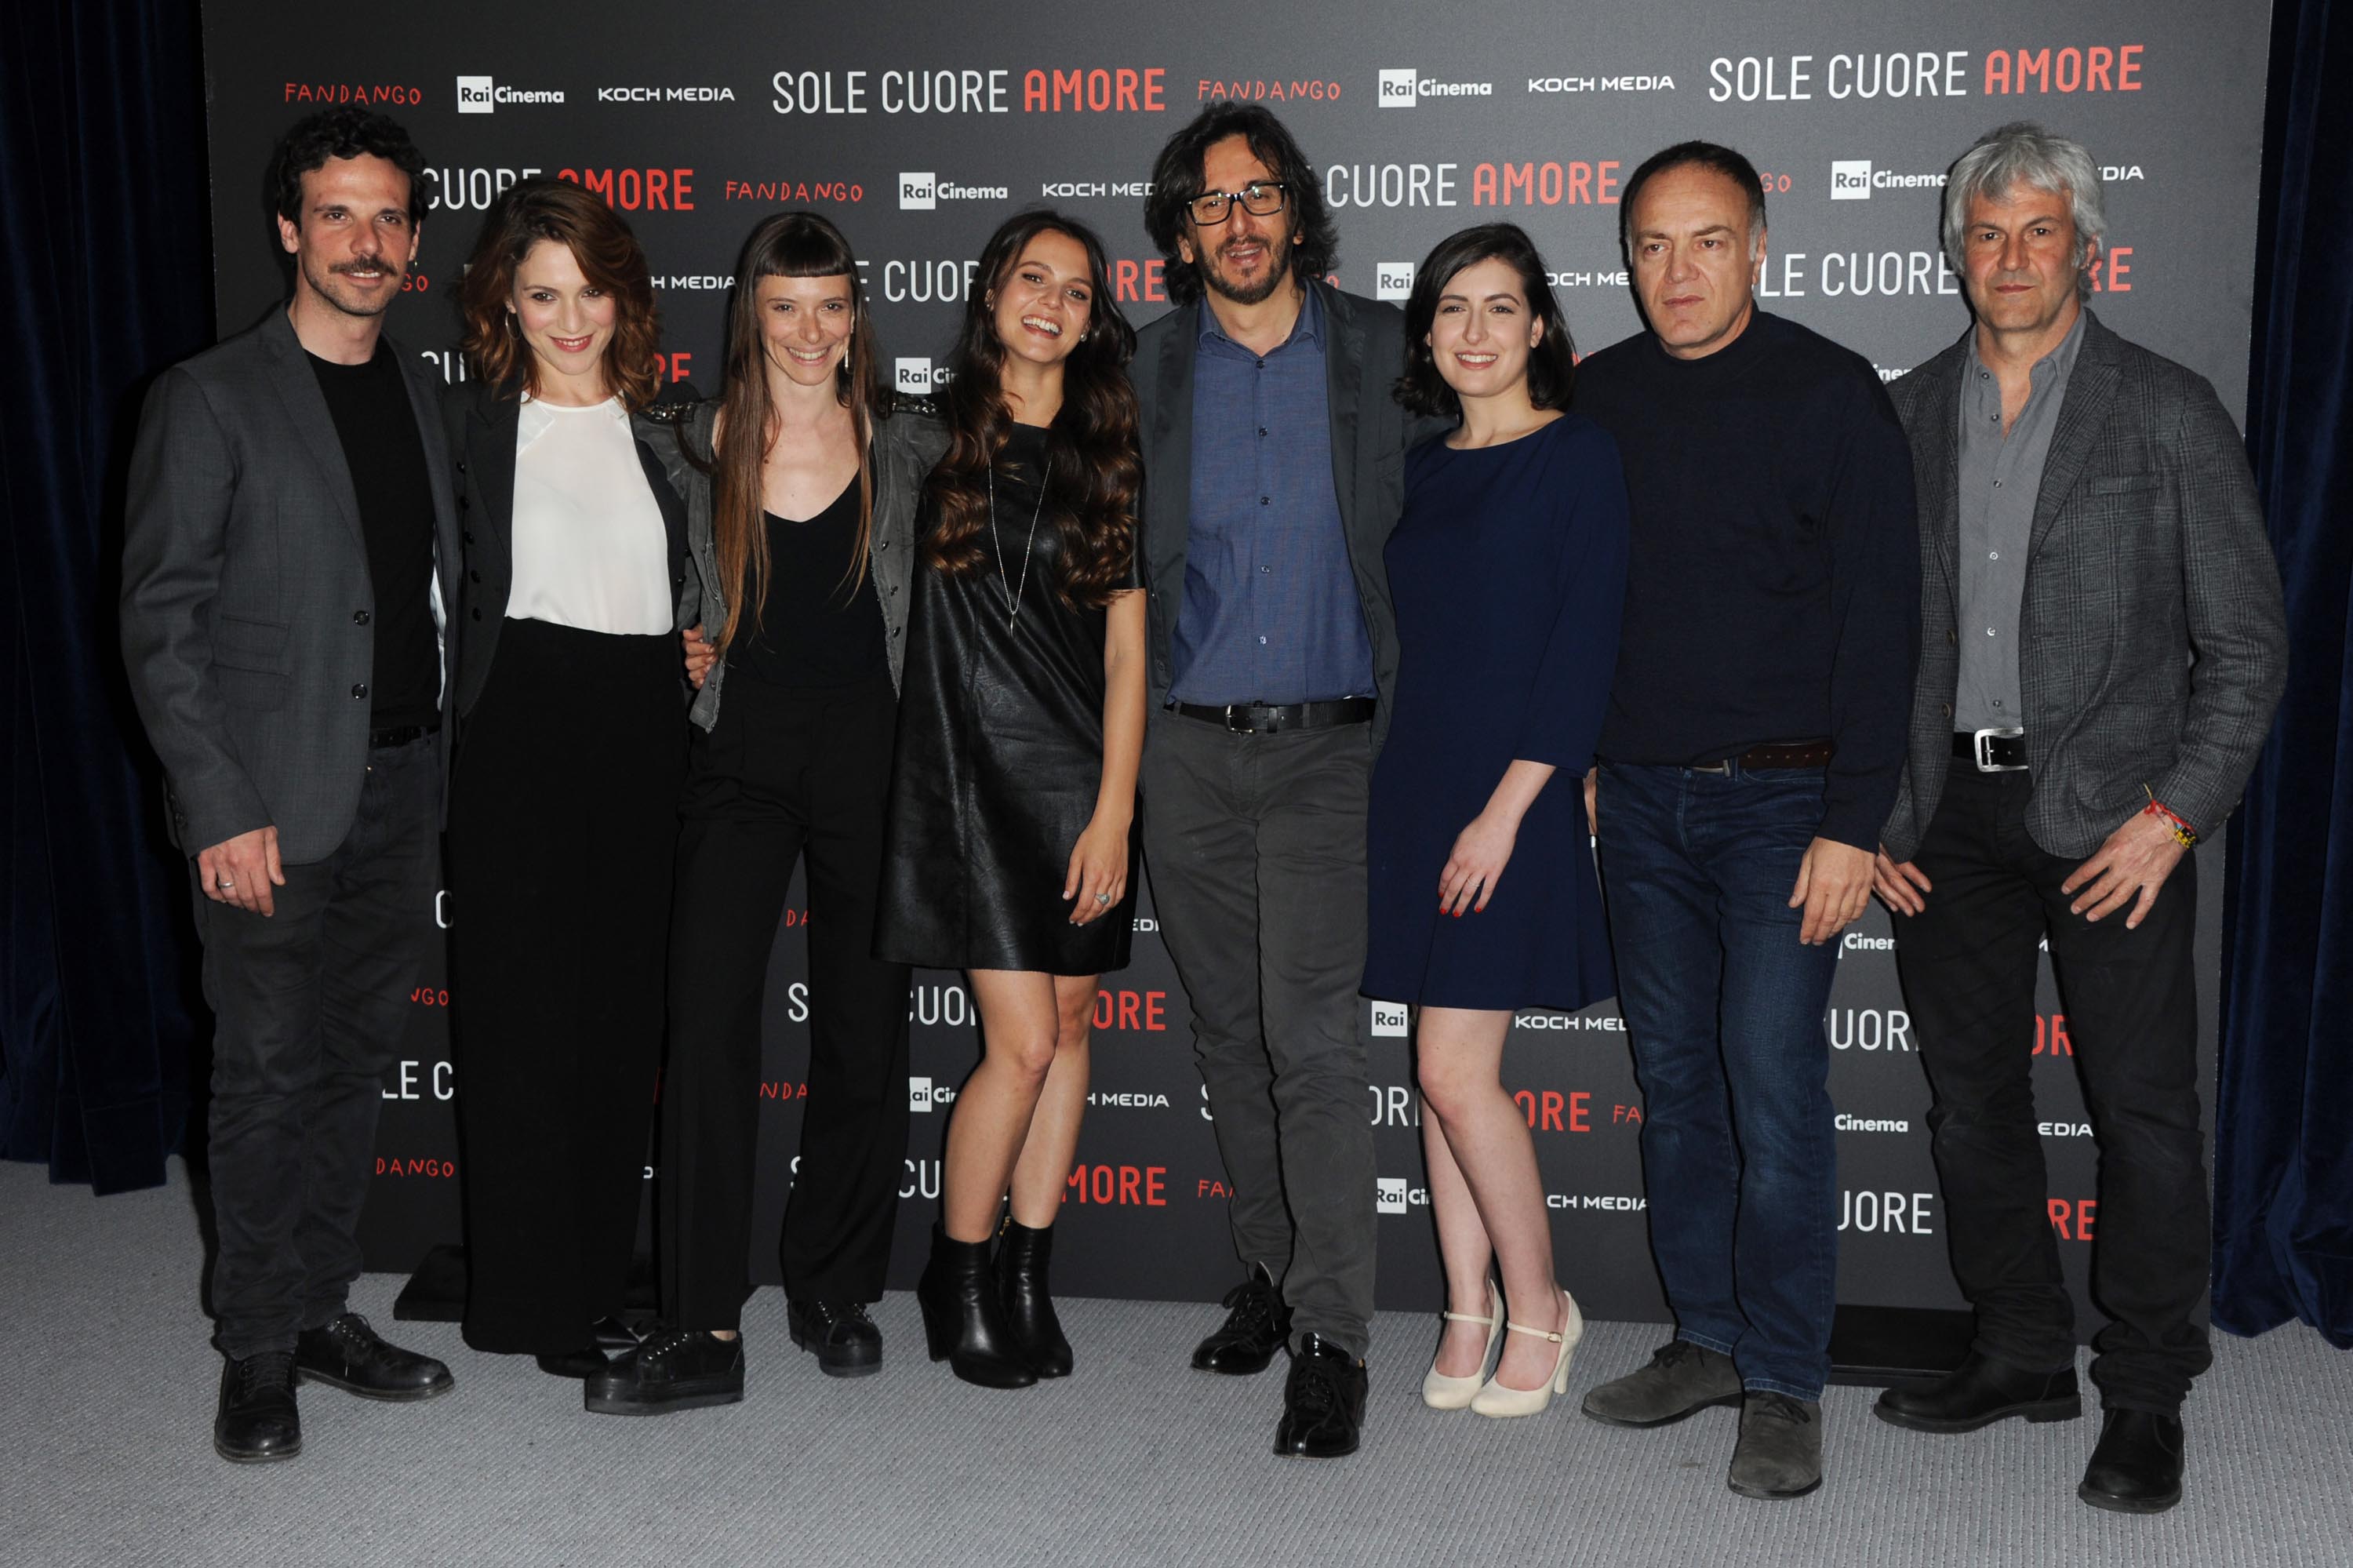 Giulia Anchisi attends Sole Cuore Amore photocall